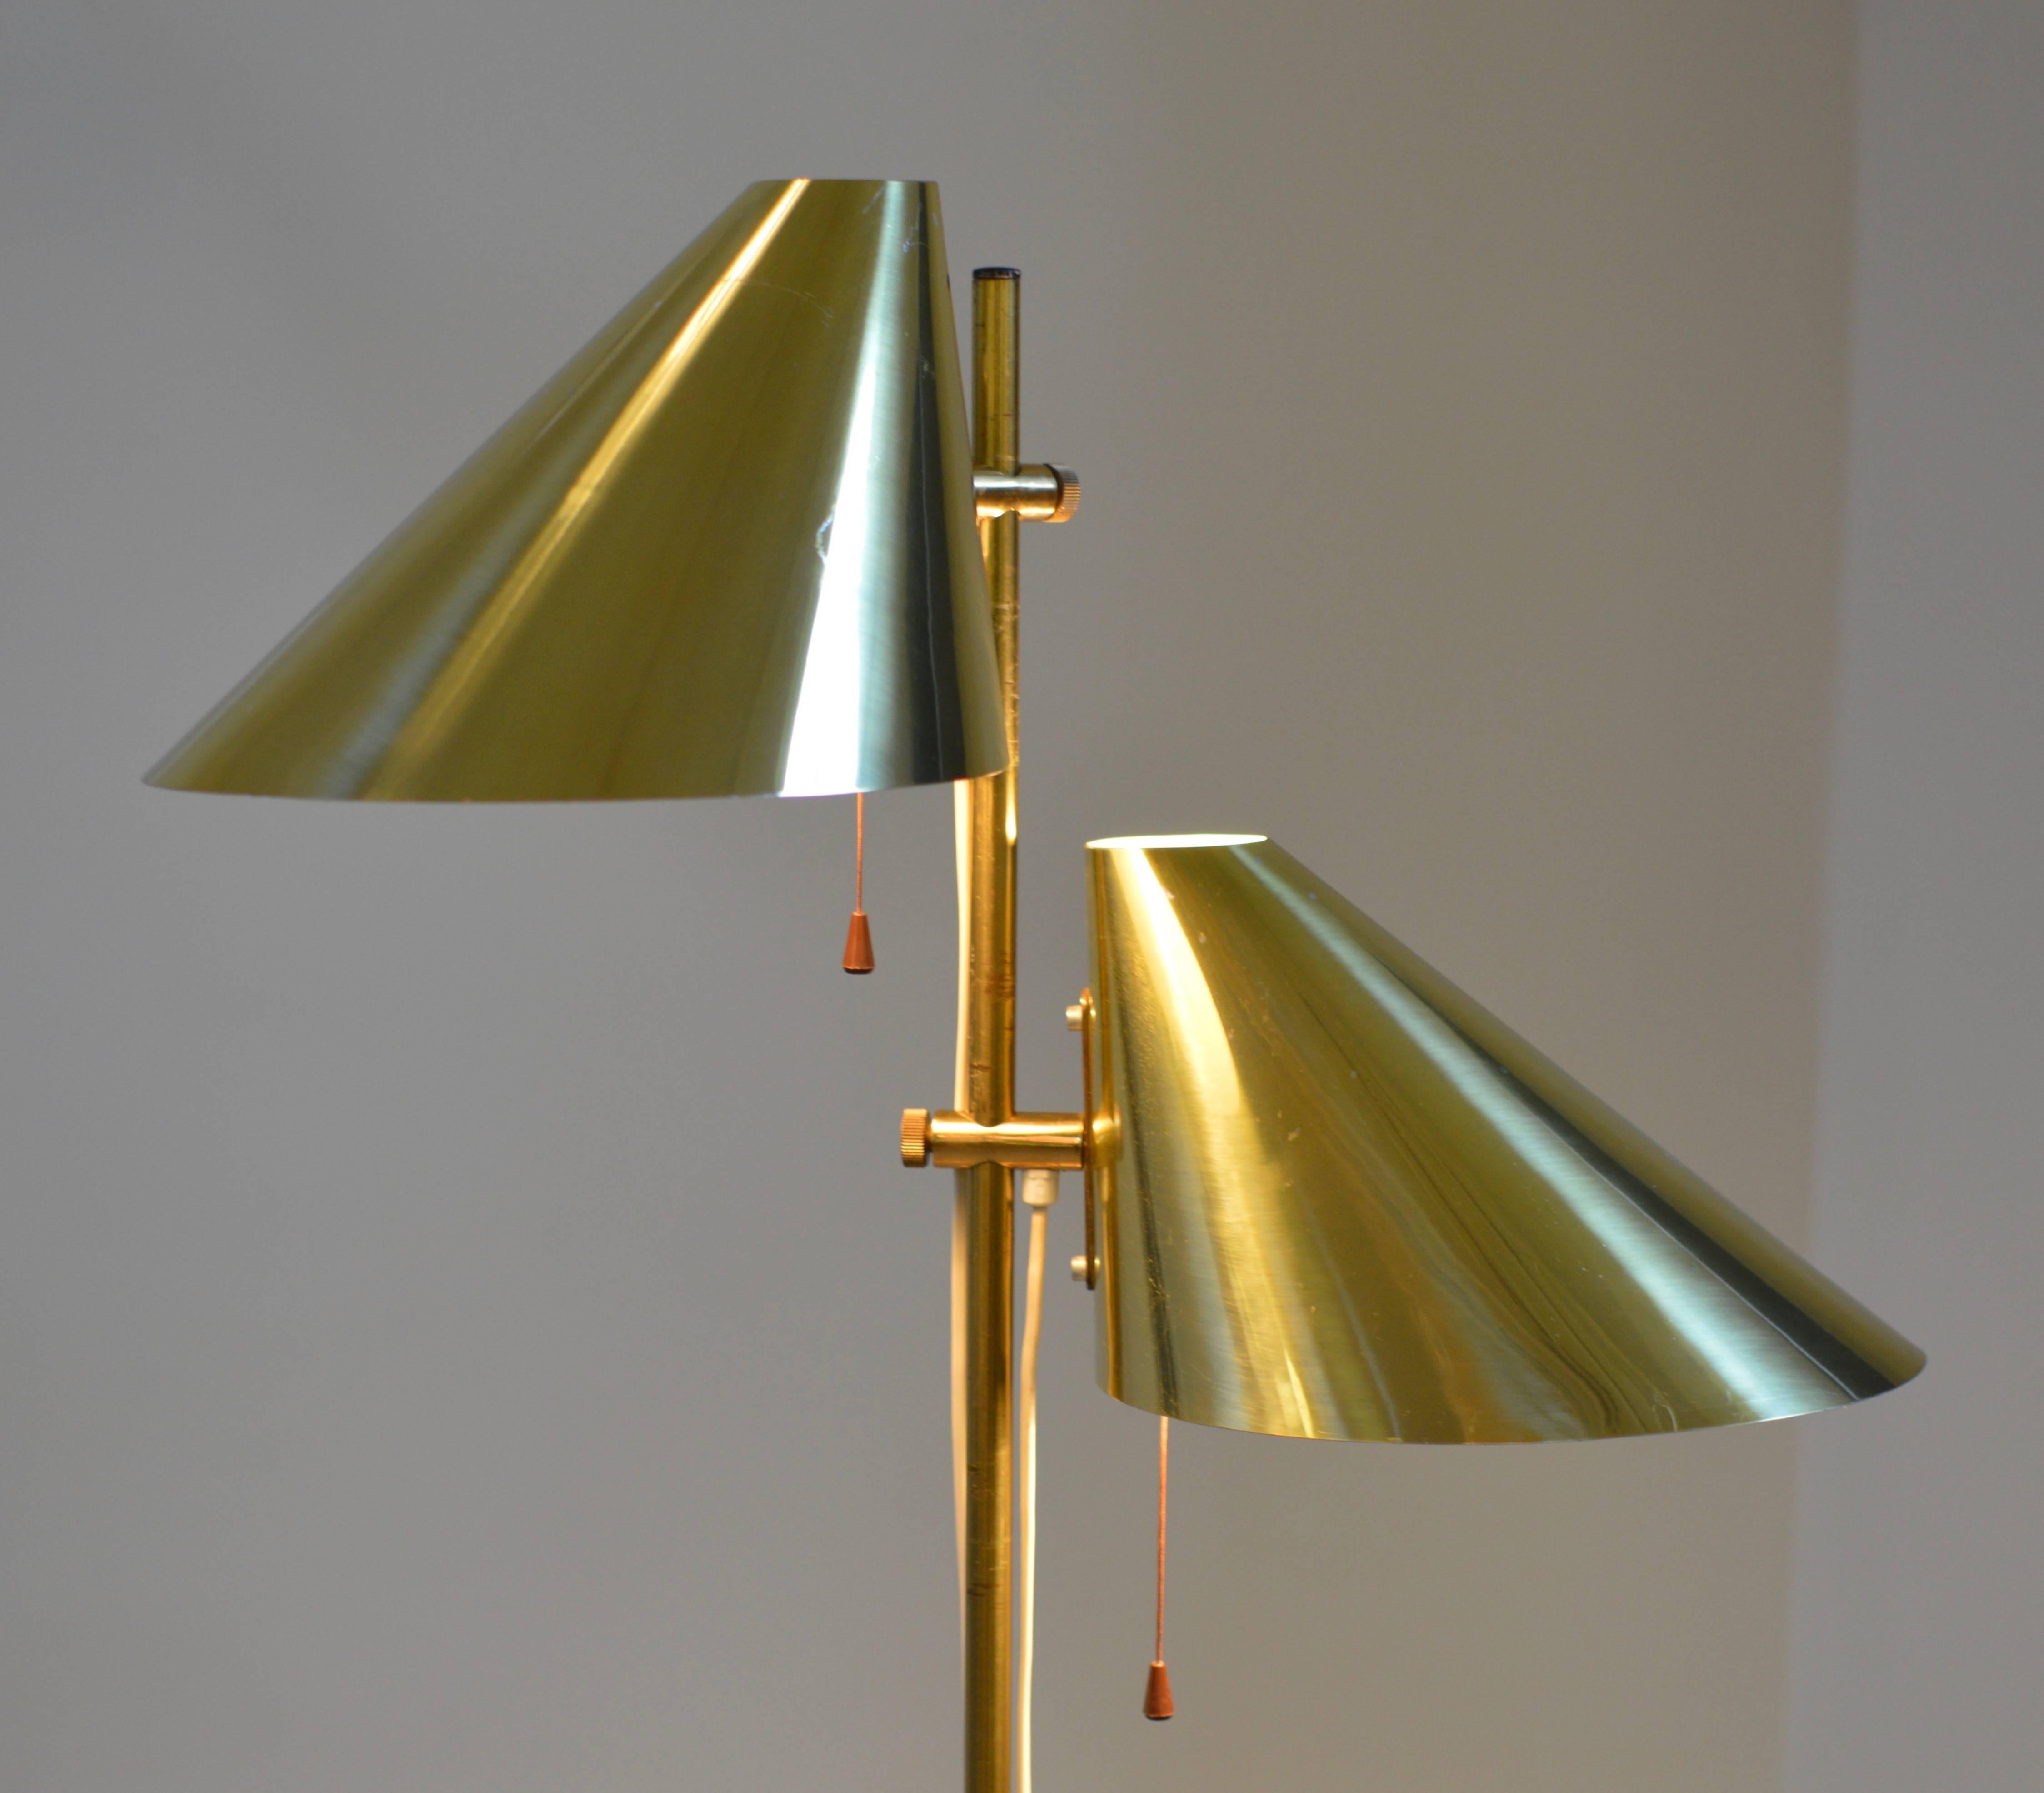 Brass double shade floor lamp by Hans-Agne Jakobsson for Markaryd, Sweden according marking/label in shade (see photo # 9).
Both shades are individually height adjustable and rotatable and can be switched on and off individually. 

Lamp comes